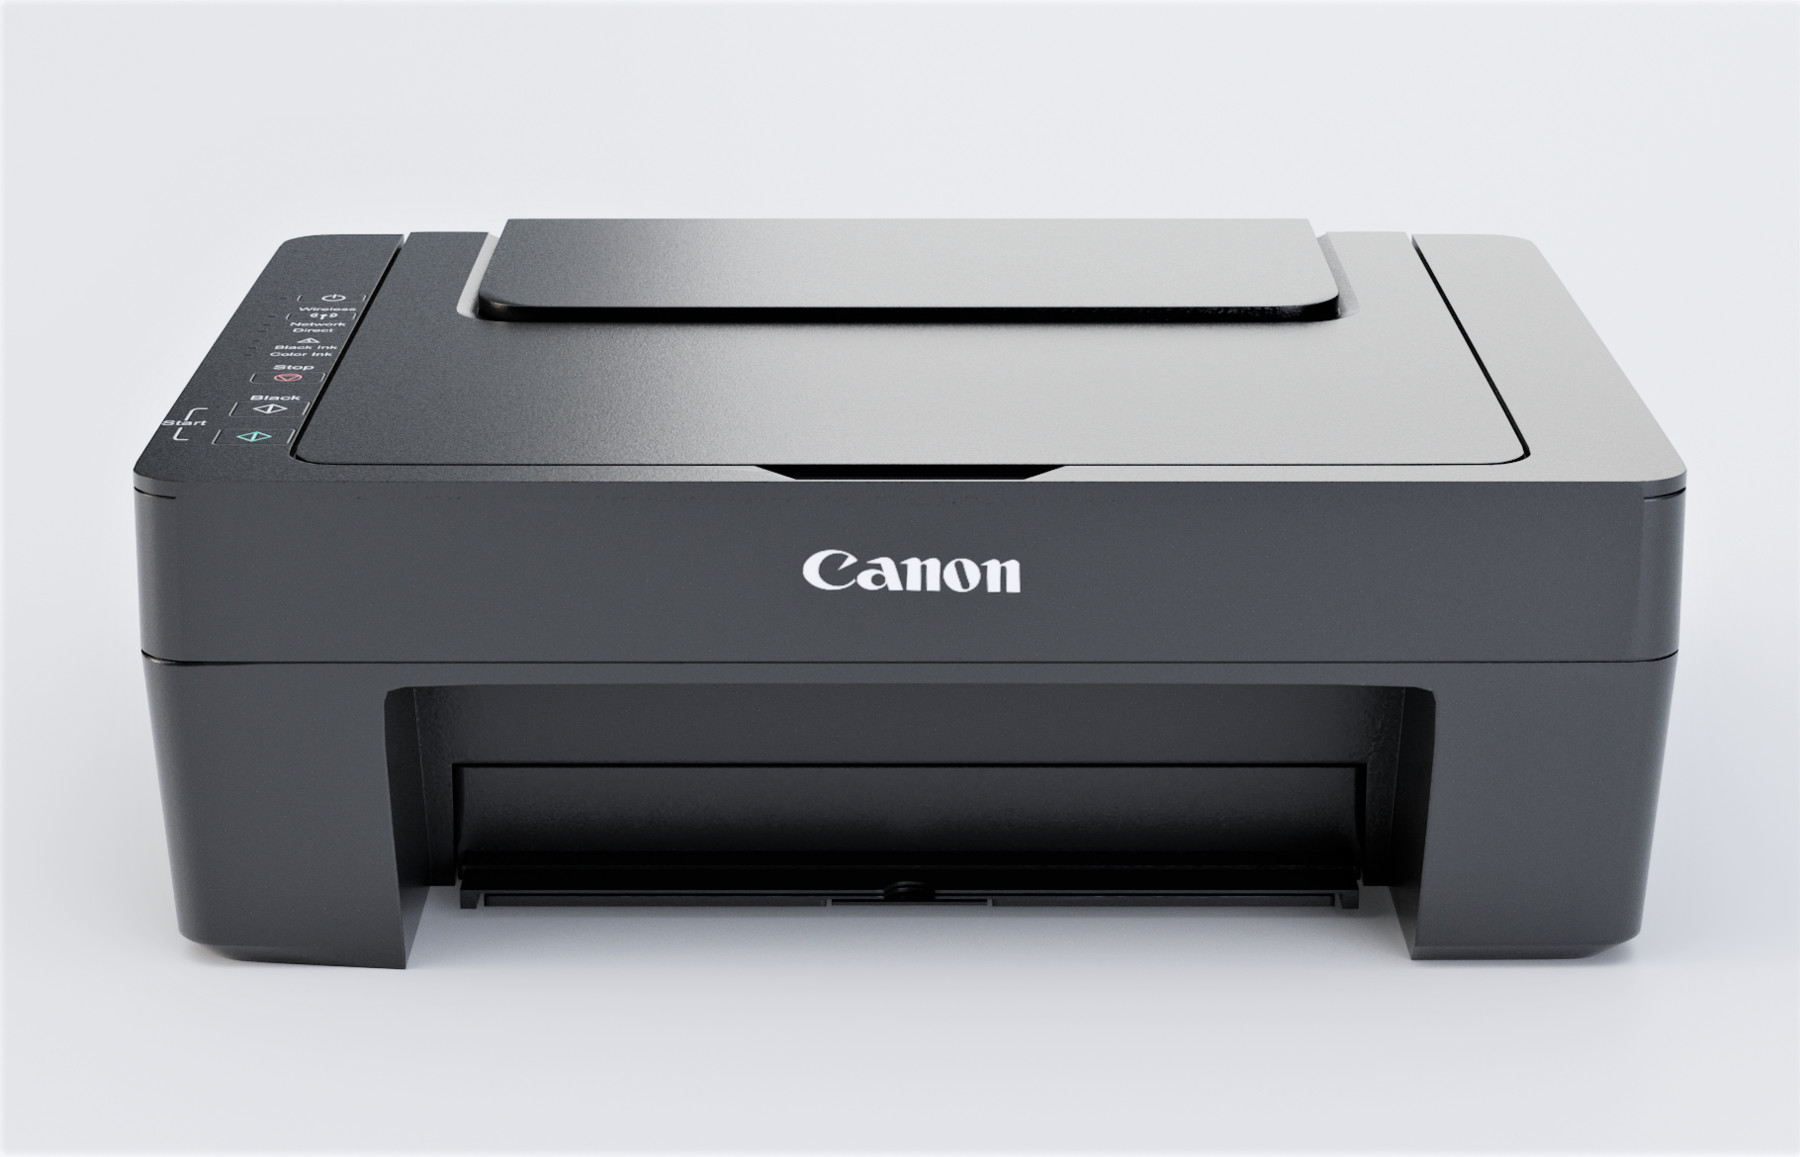 ArtStation - Canon Paper Printer - Solid Ink Low-poly 3D Model